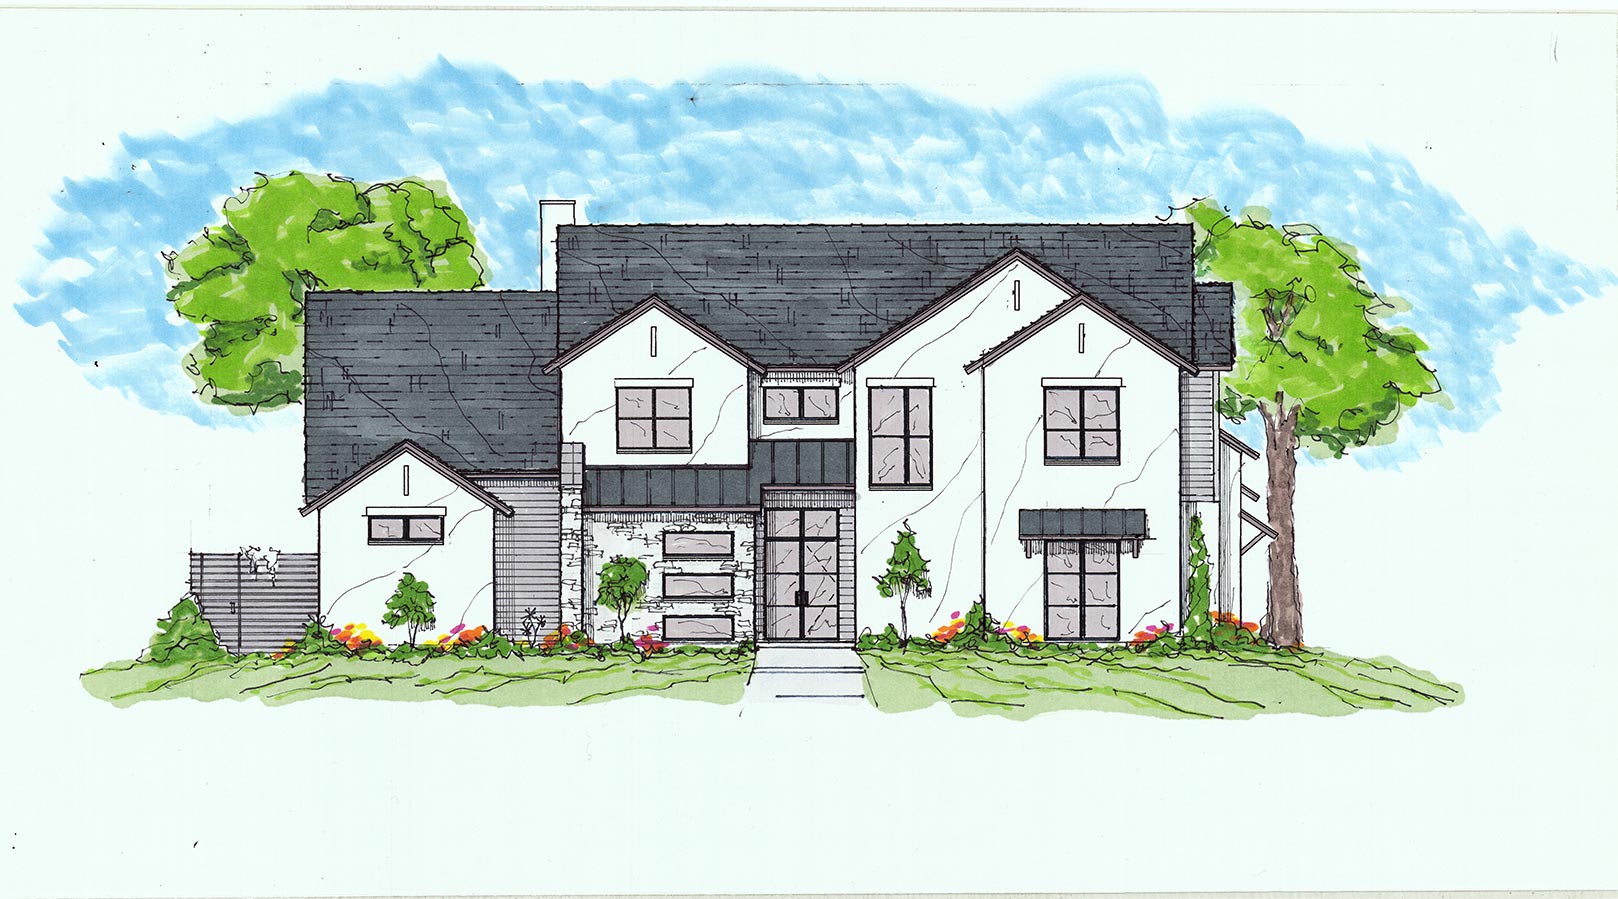 For Sale: New Custom Home at 5861 Meletio Lane in North Dallas, TX (Drawing is concept only)